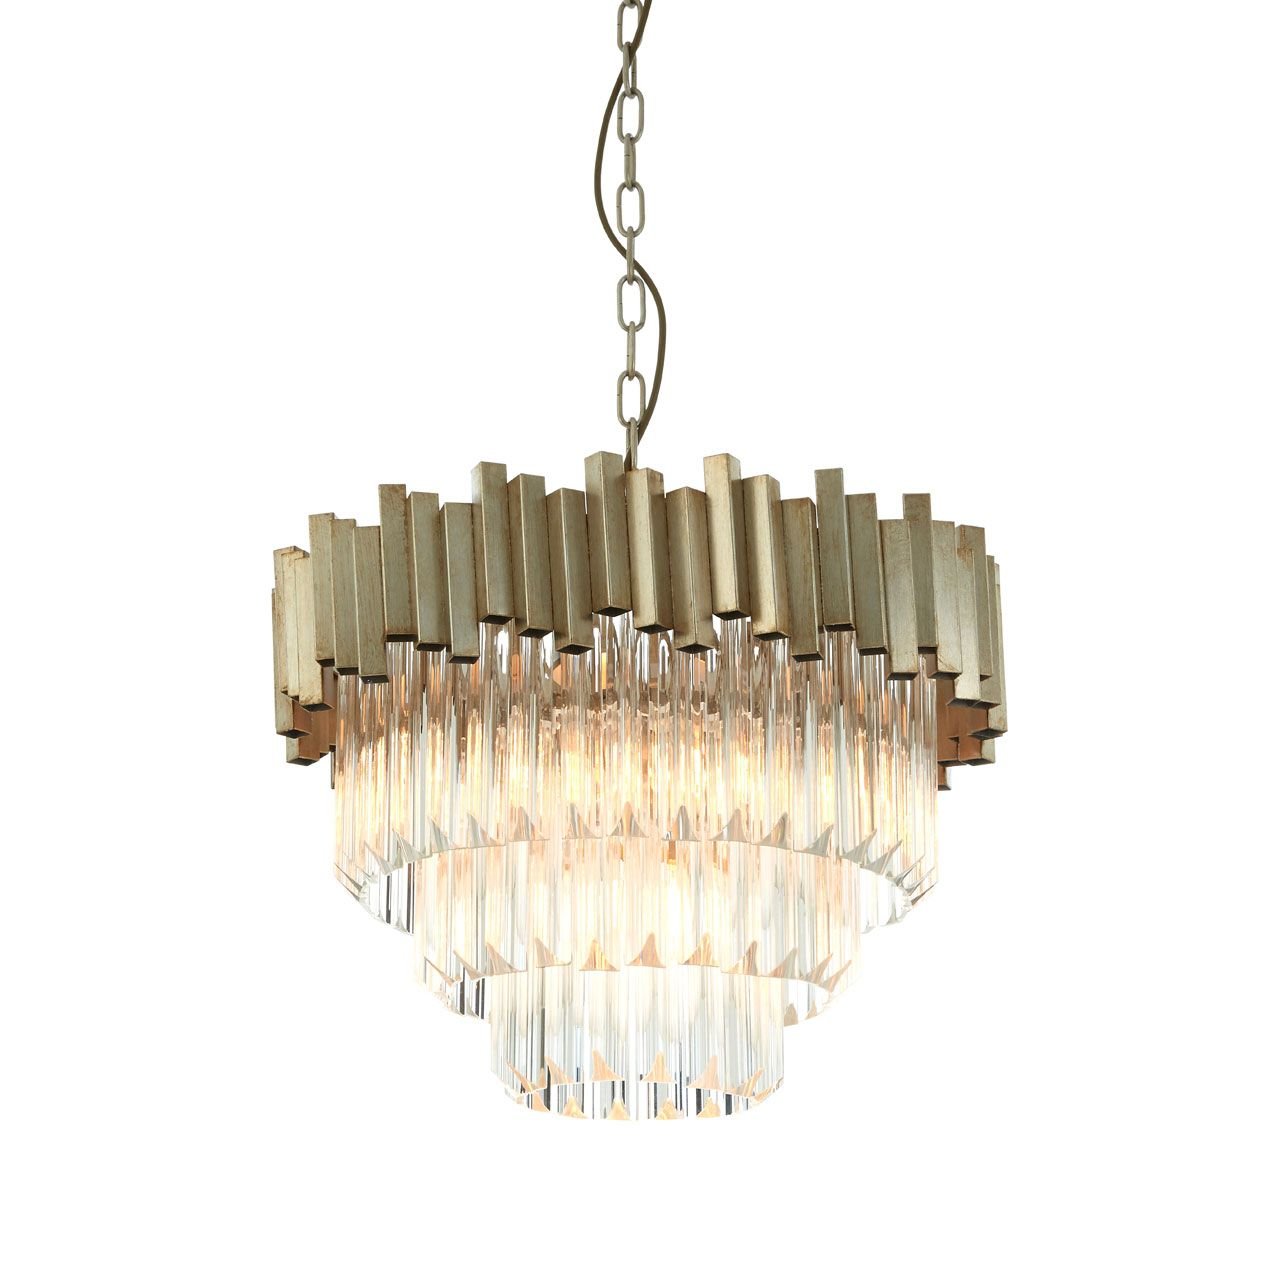 Lustra Large Silver Finish Chandelier - LIGHTING, Chandeliers ...